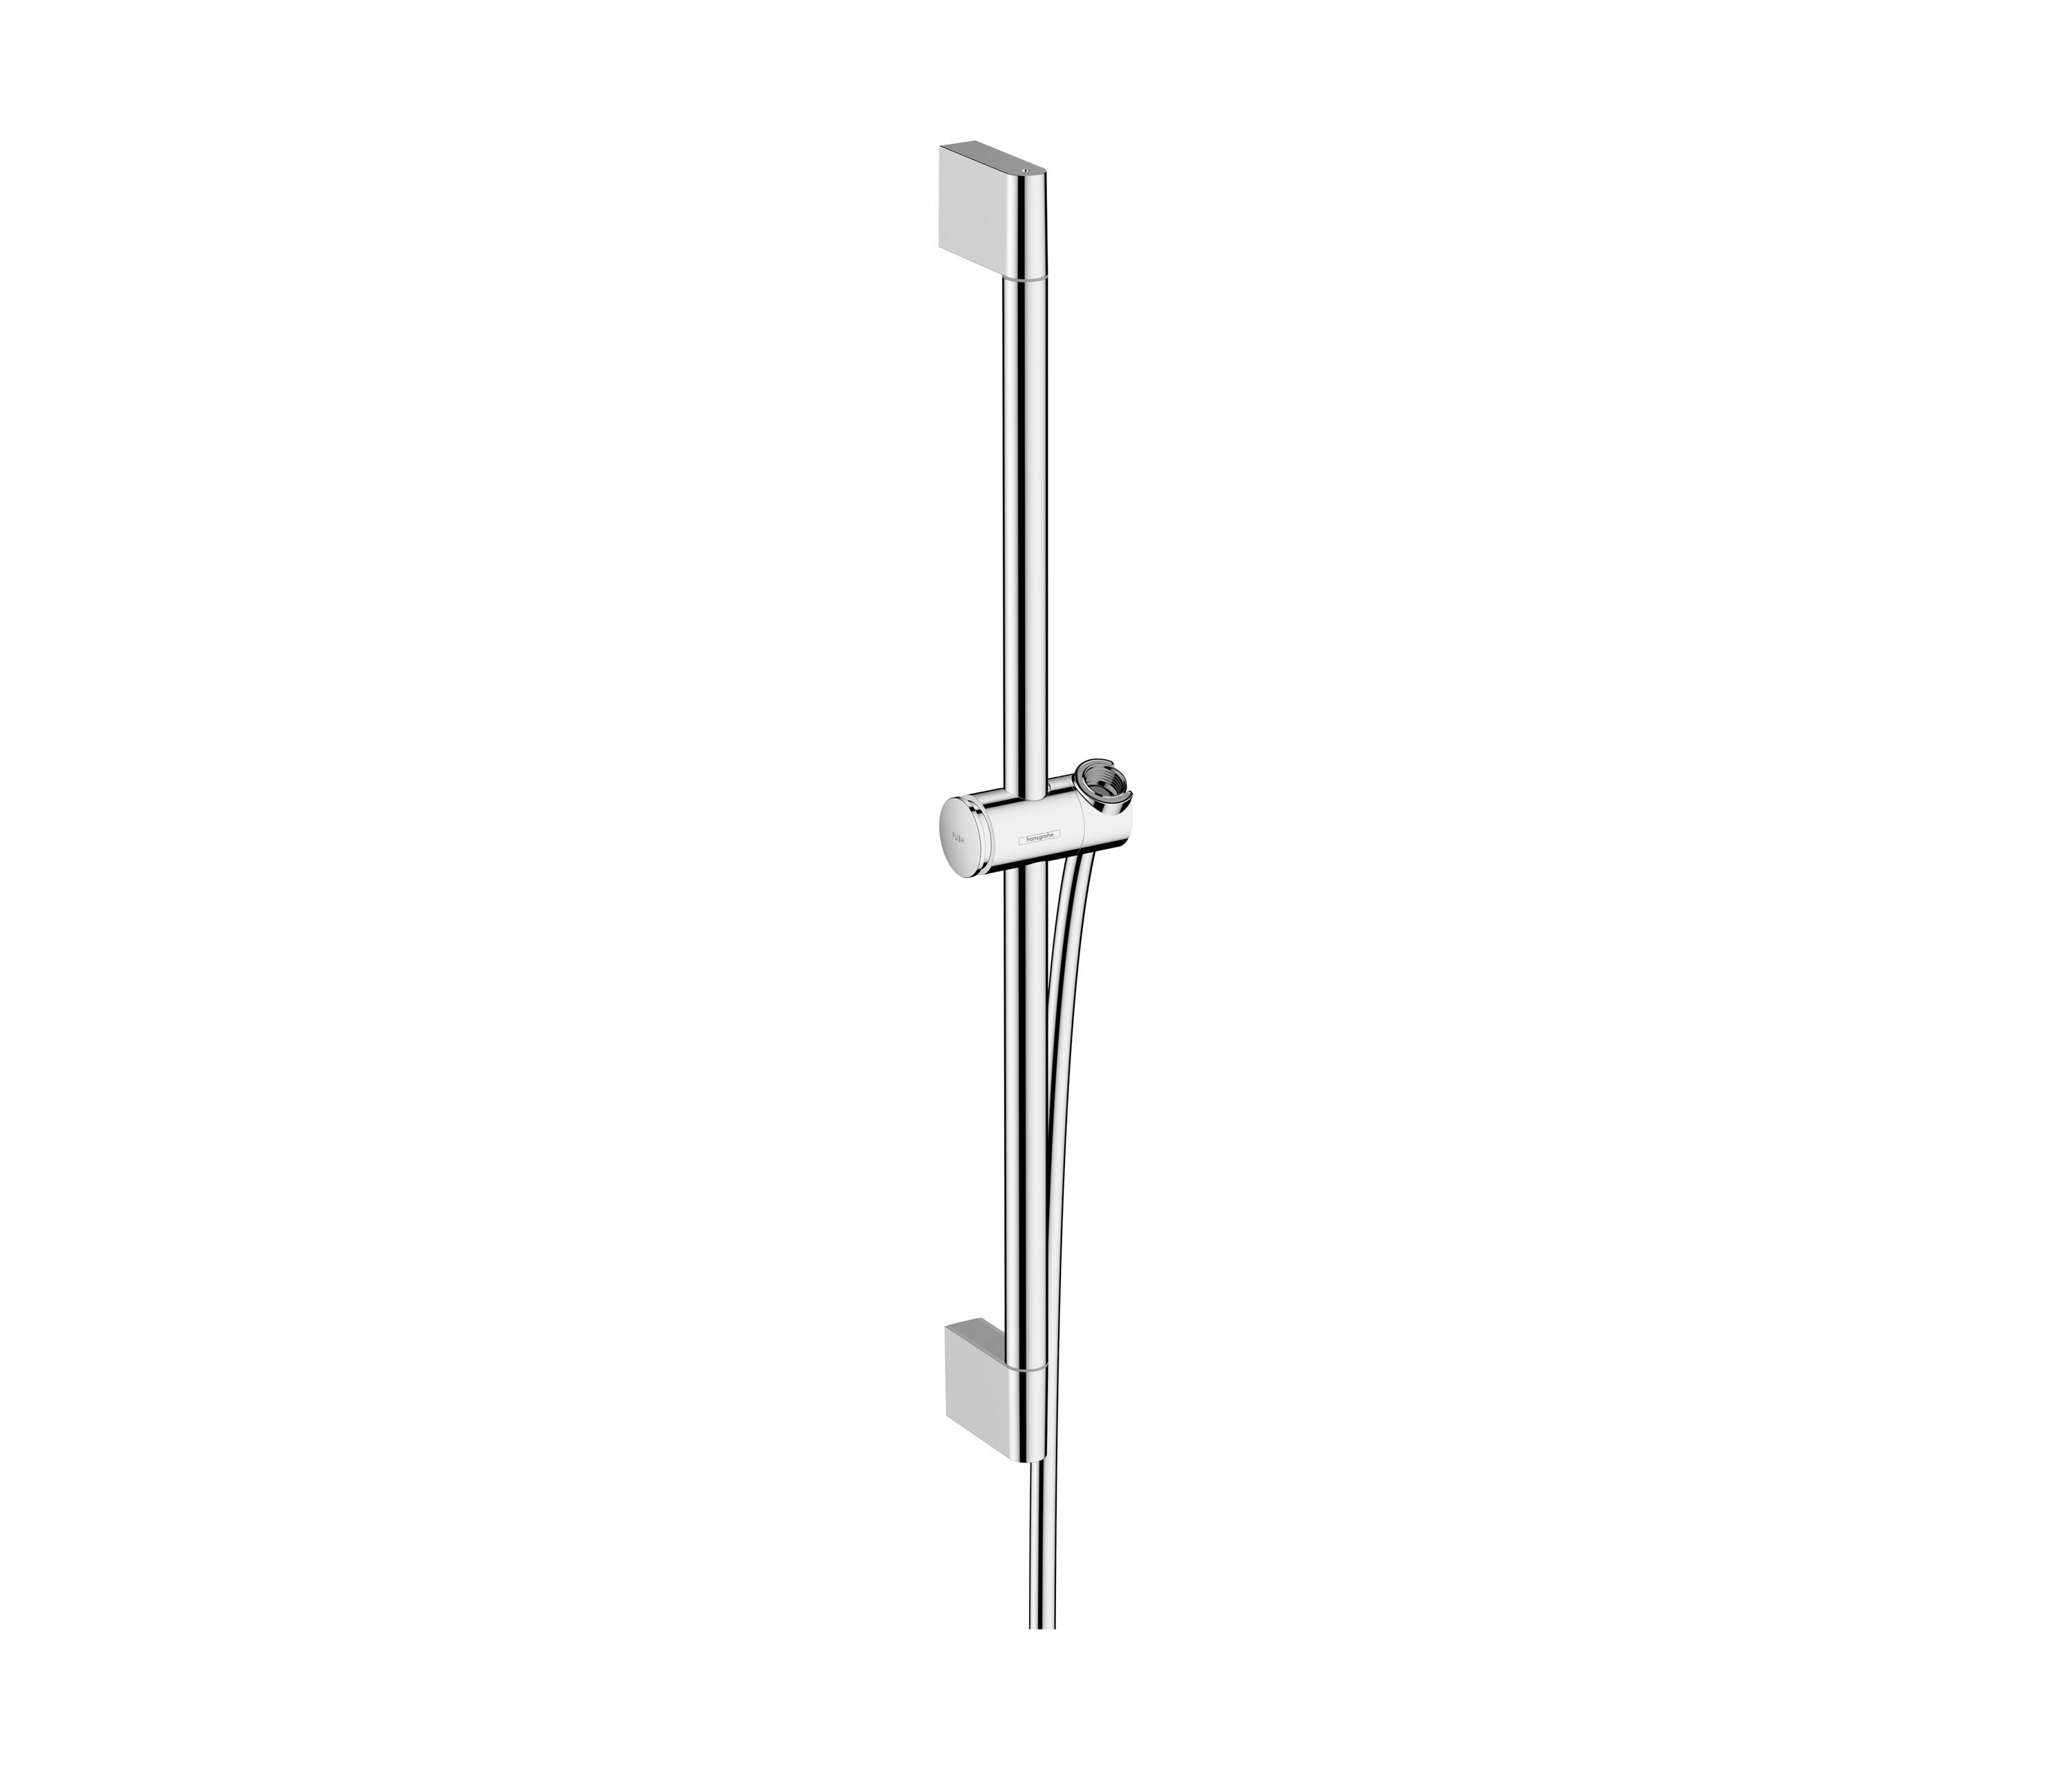 Unica Shower bar 65 with push slider and shower hose | Architonic